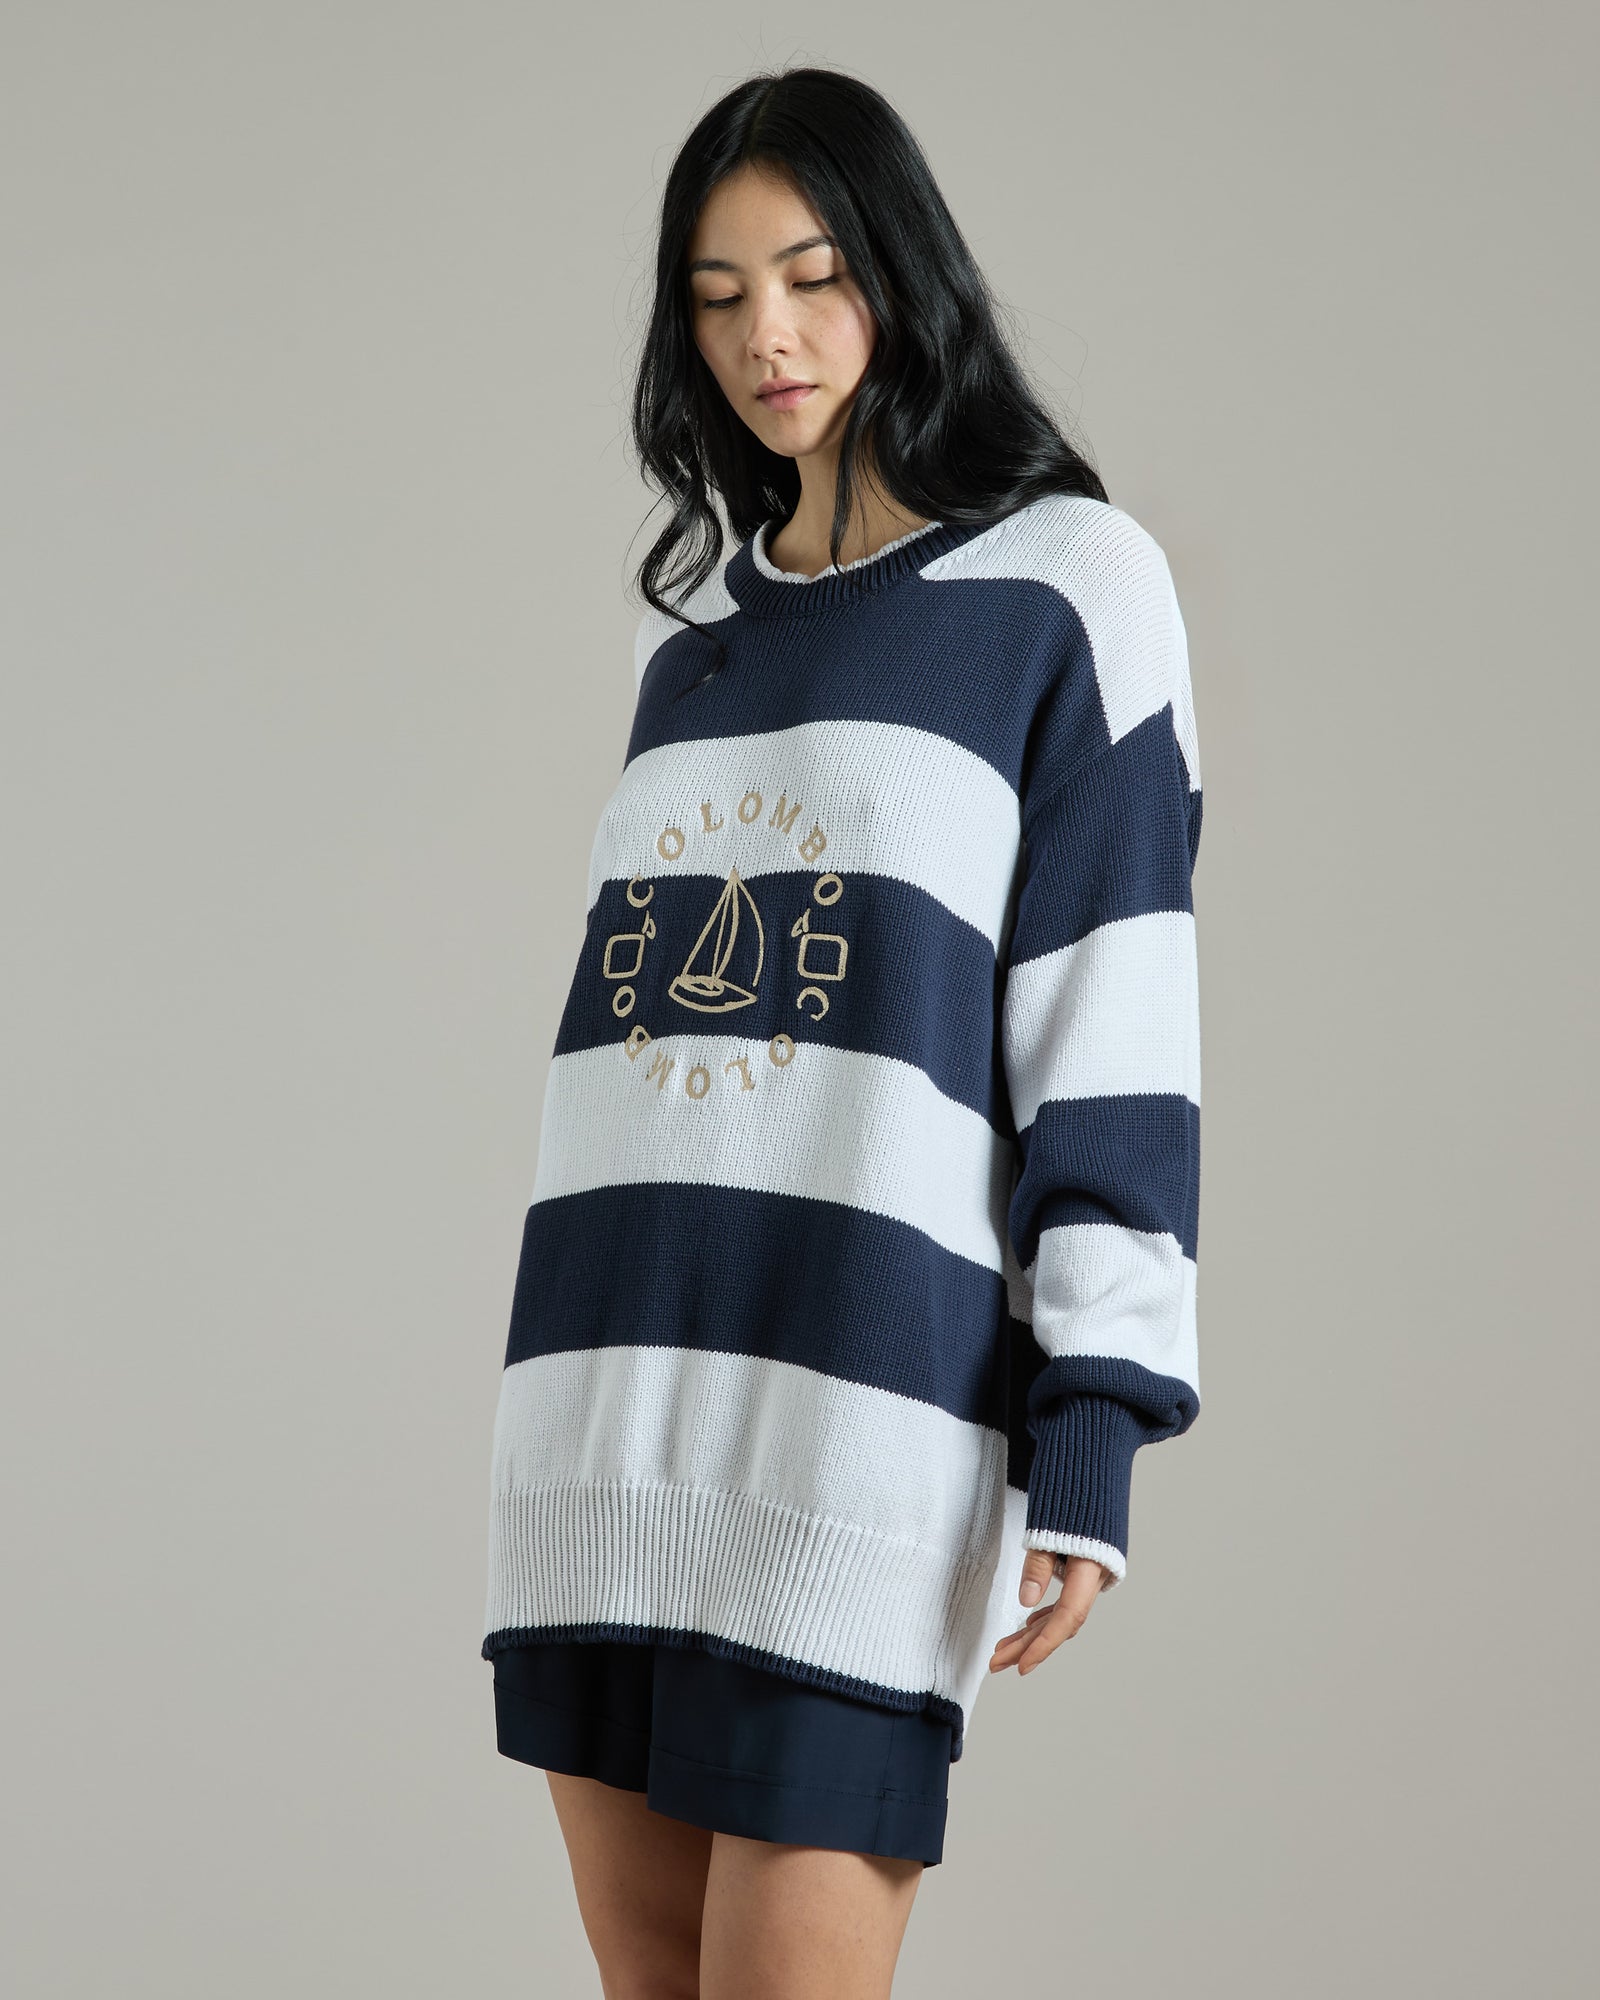 Oversized crew neck sweater with stripes